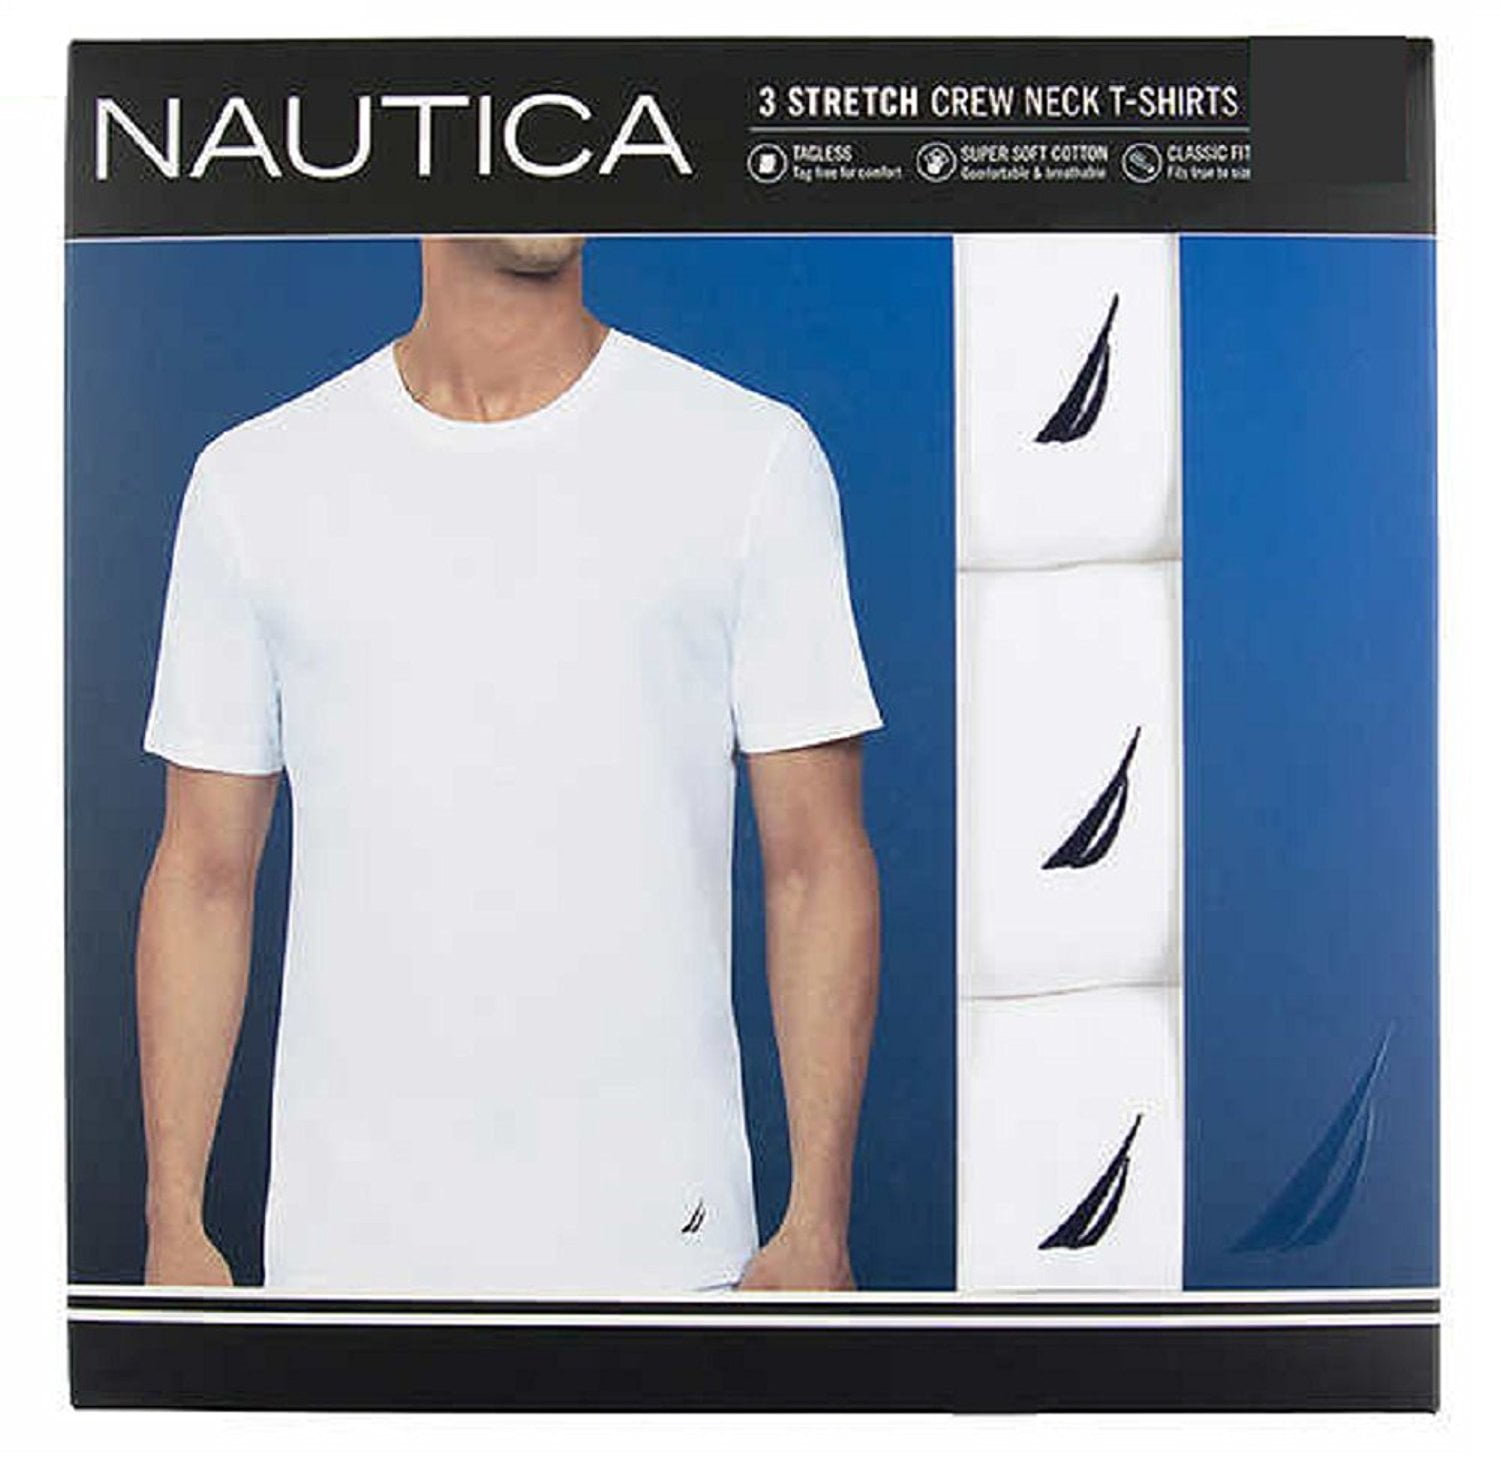 3-Pack NAUTICA 100% Cotton CREW NECK T-Shirts WHITE with Sail Boat Logo 